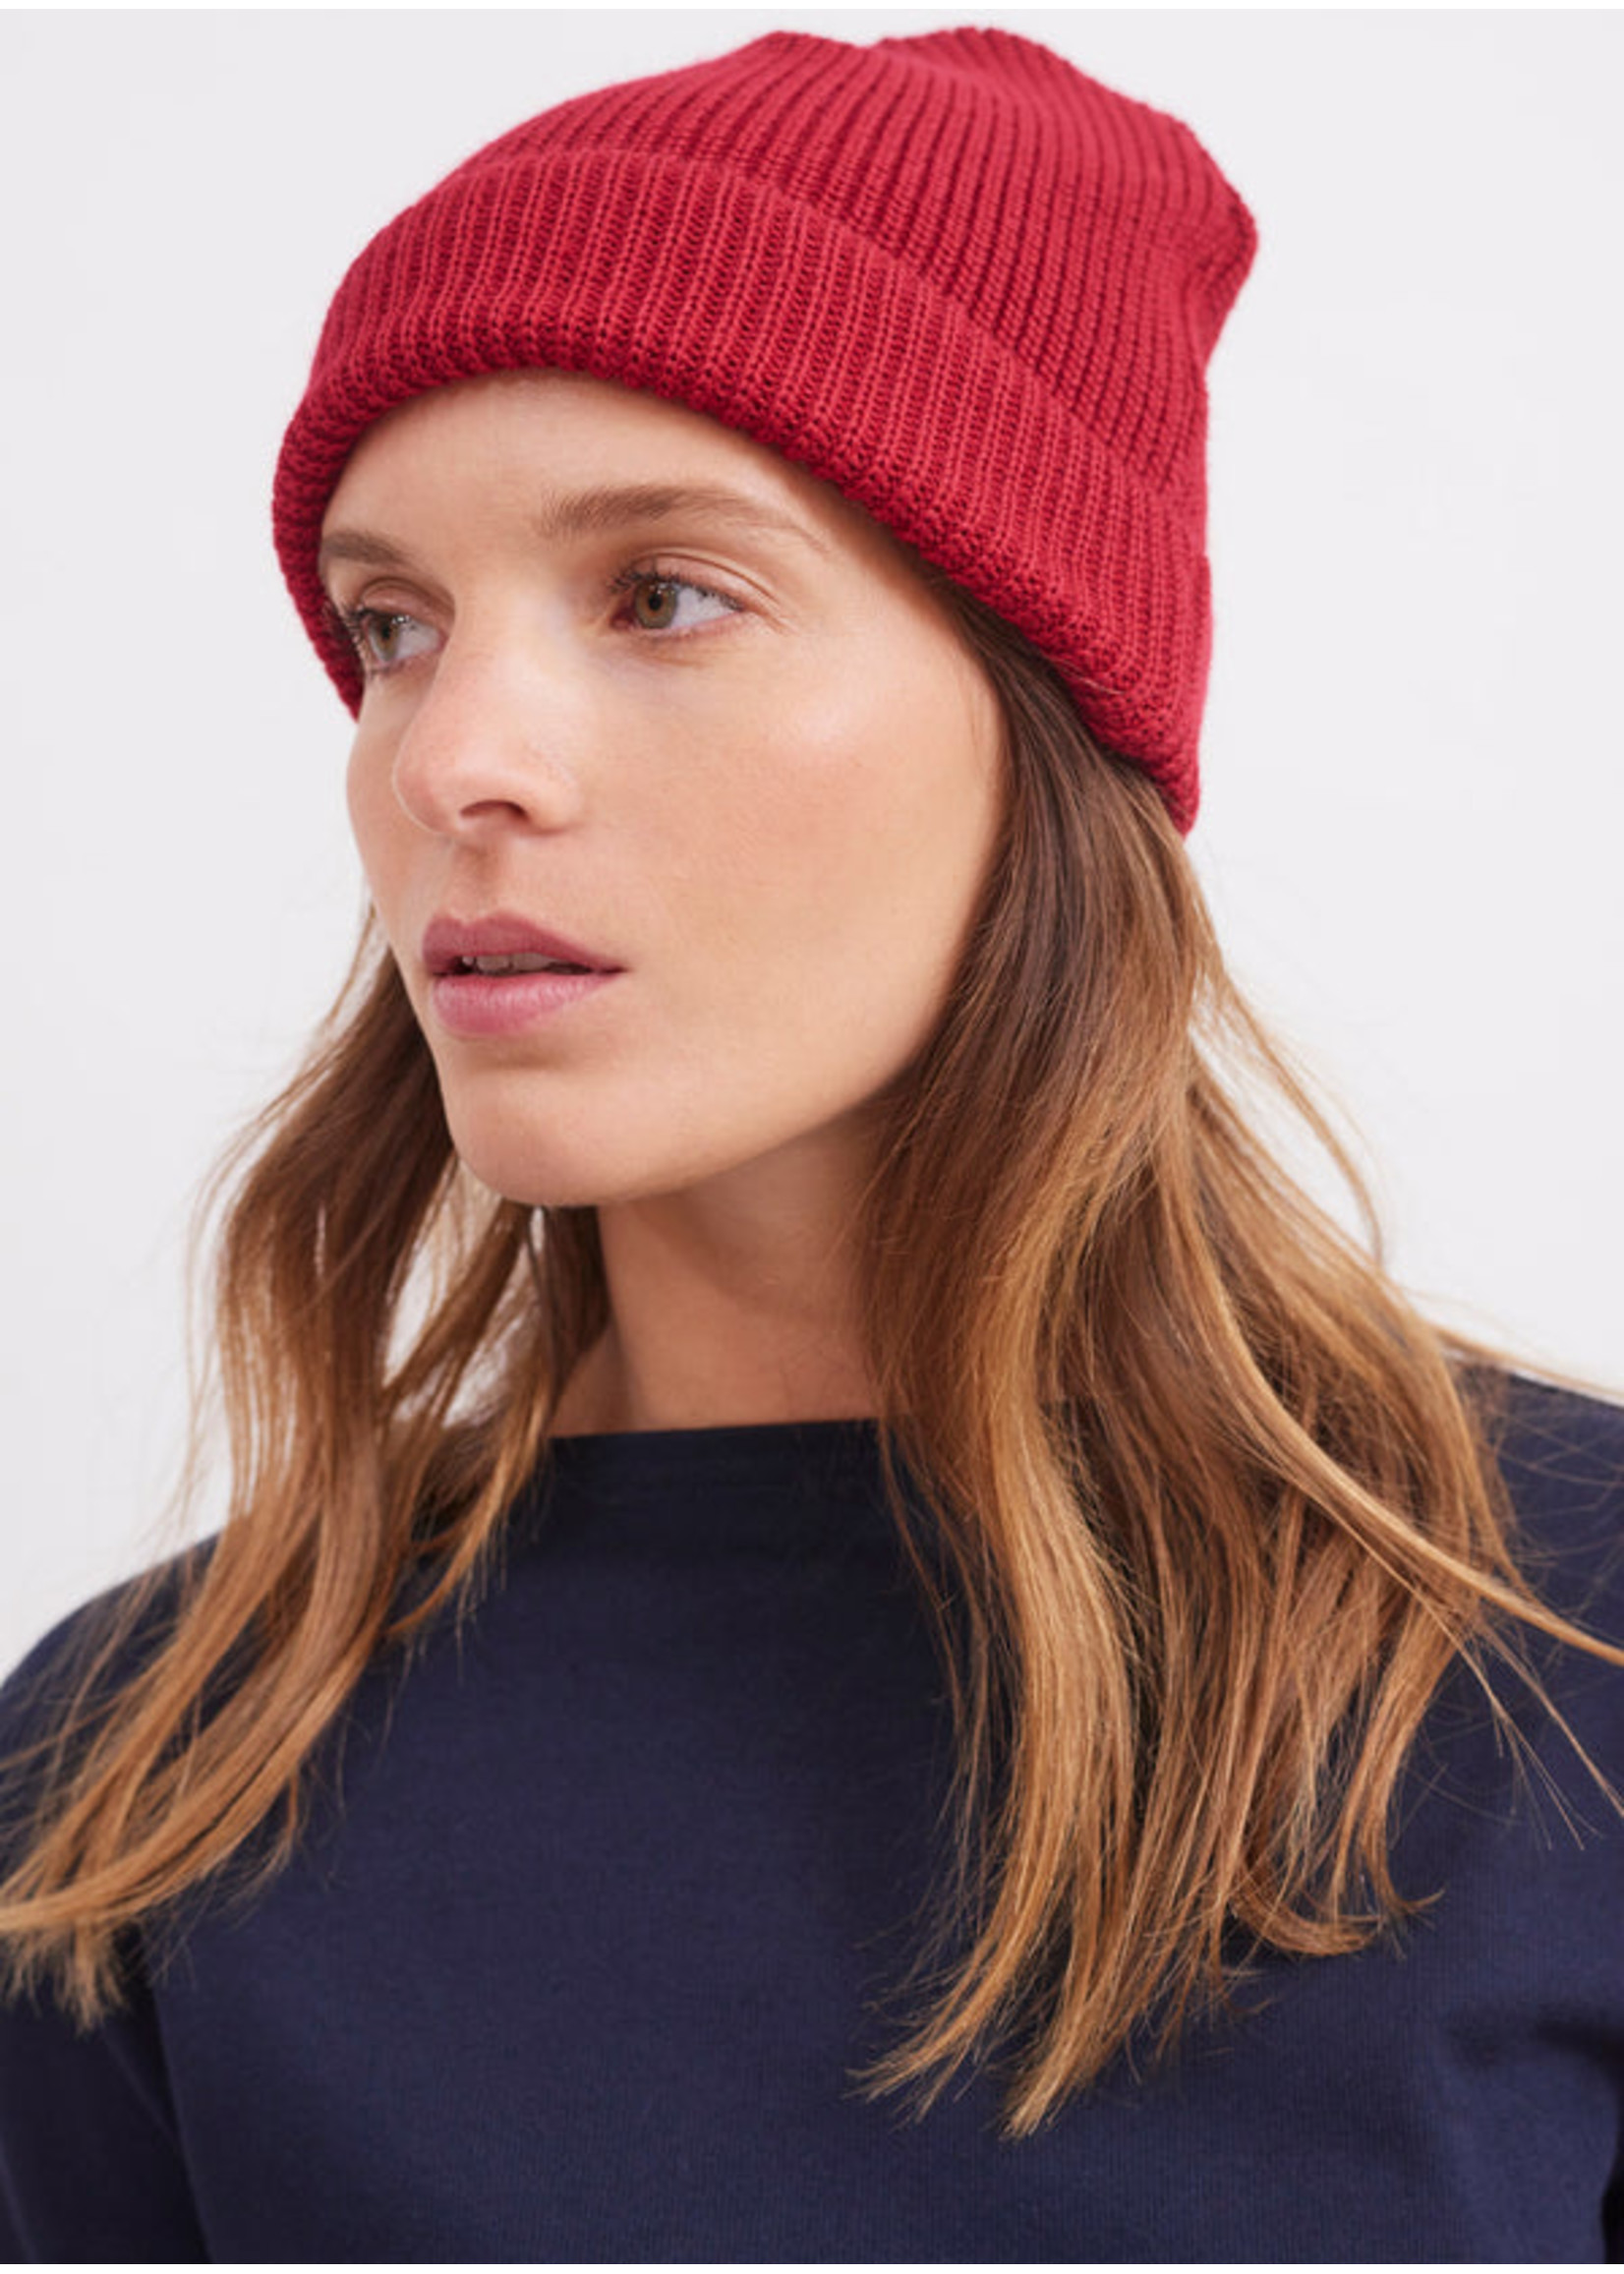 Unisex knitted wool beanie - Lacroix espace boutique